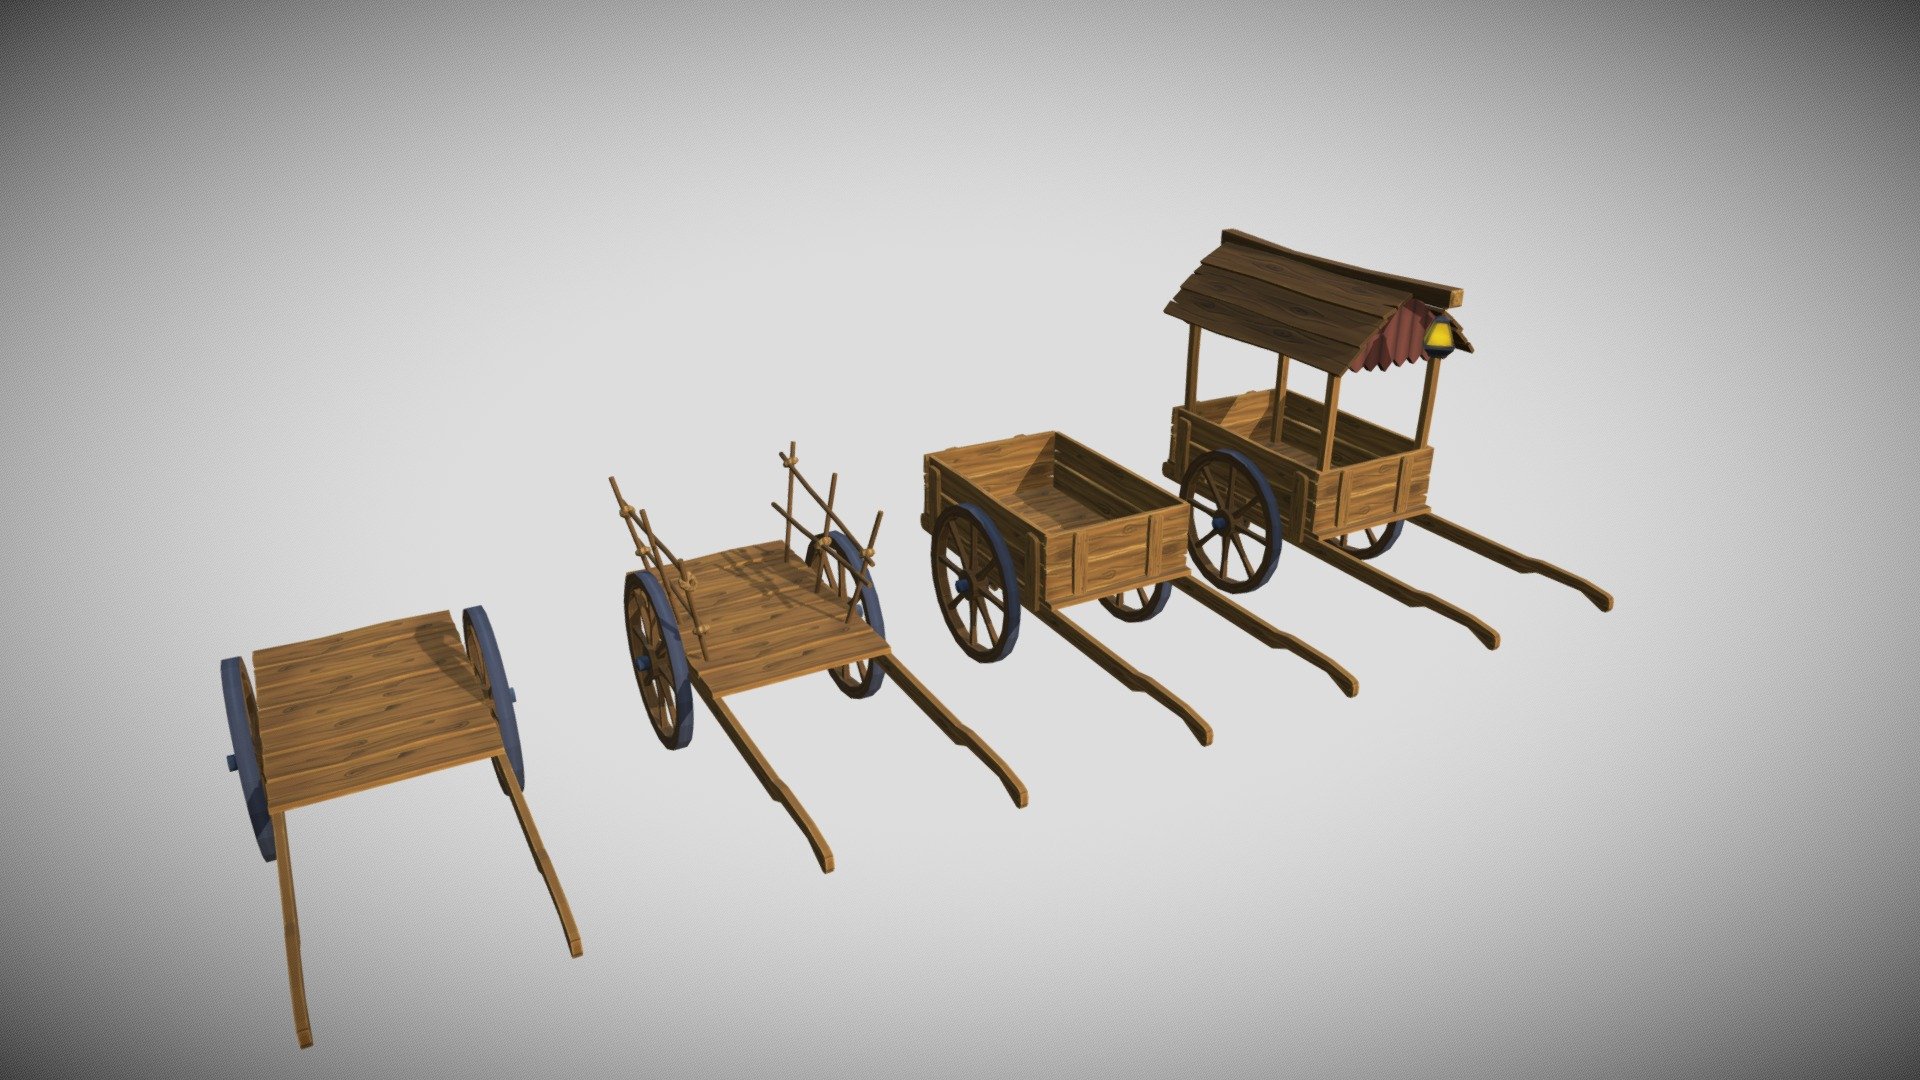 Pack of 4 Carts

Created in blender Hand painted texture with quality: 2048x2048

Content: fbx 3D model with four Carts with handpainted texture. 1 texture and 1 UV map for all models.
Wheels are as separate object for creating easy moving animation 3d model